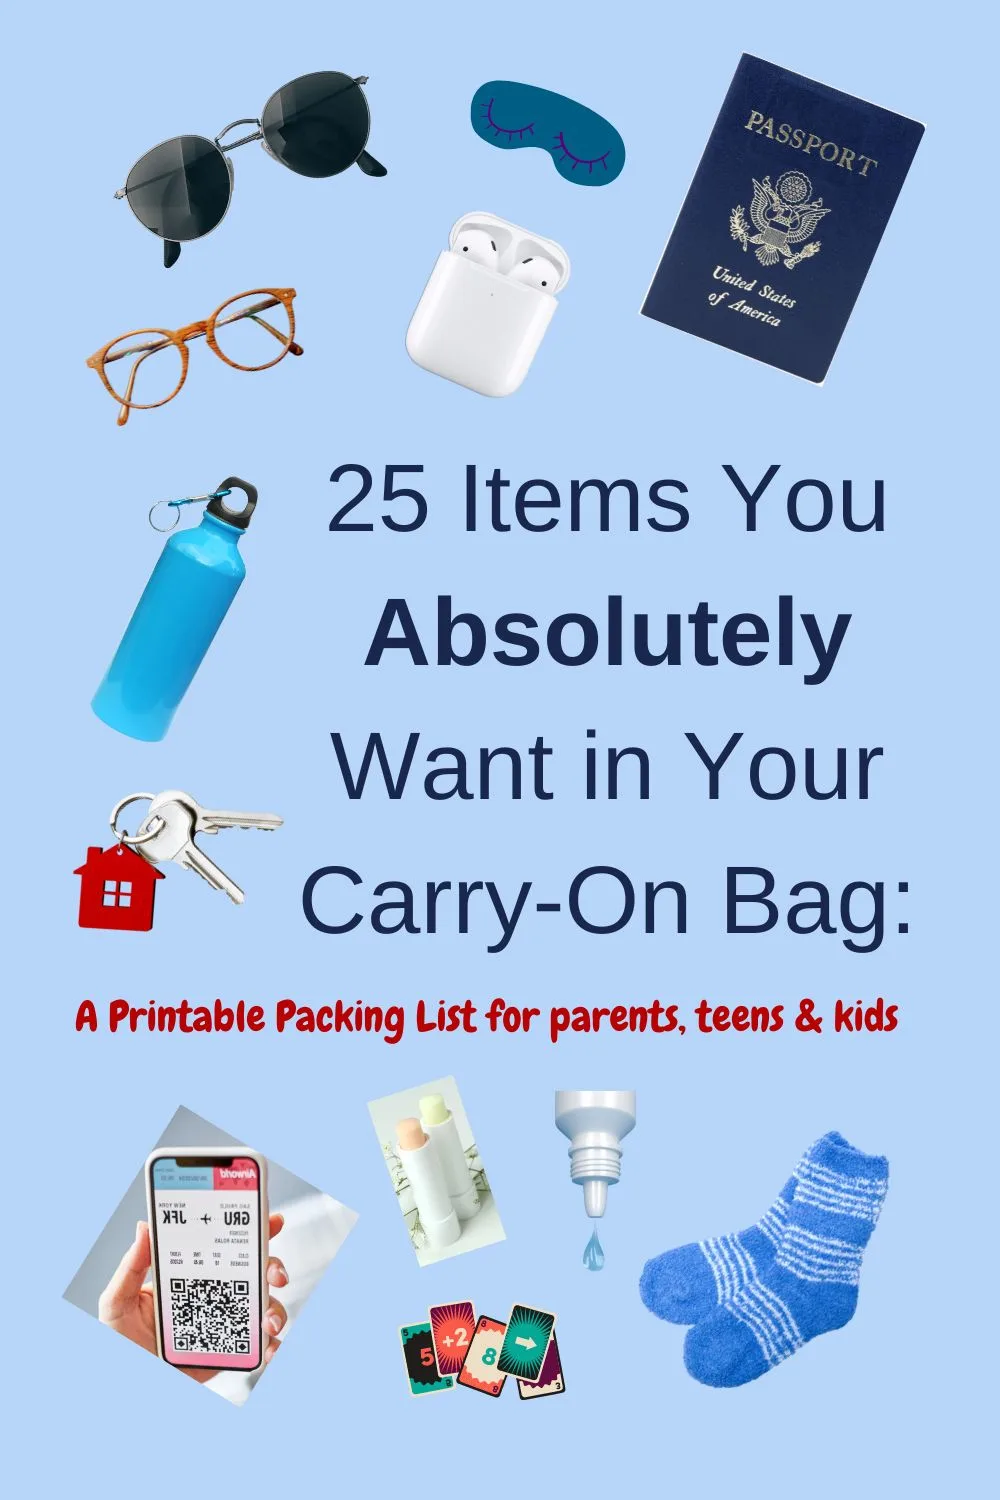 the items you pack in your carry-on bag are more important than almost anything in your suitcase. here is a printable packing list for adults, kids & teens of 25 key things to remember.